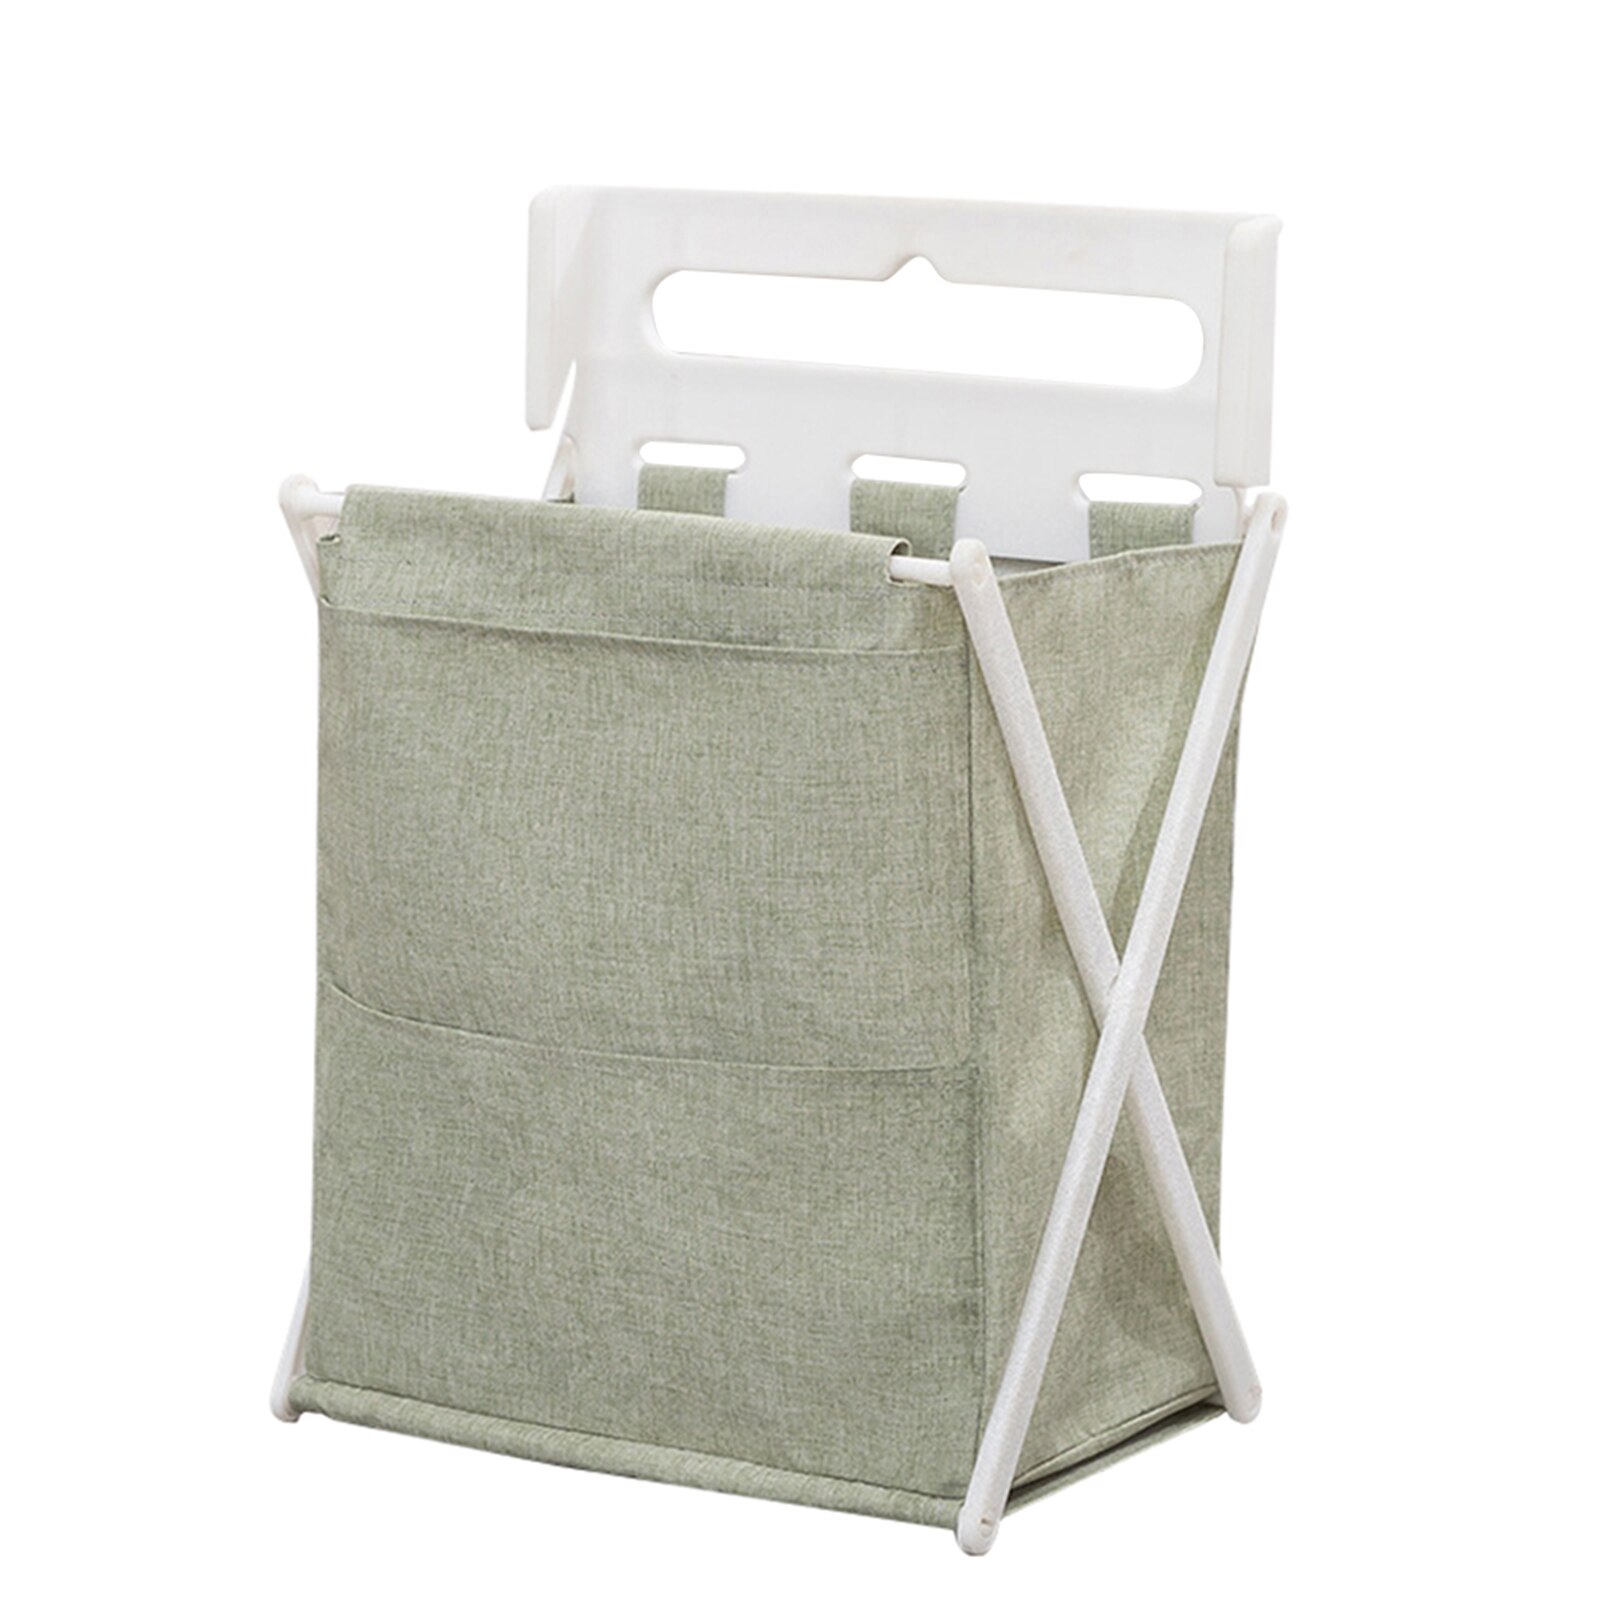 Wall Mounted Laundry Organizer Bag Foldable Washable Laundry Basket Home Clothes Storage Hamper @LS: Green